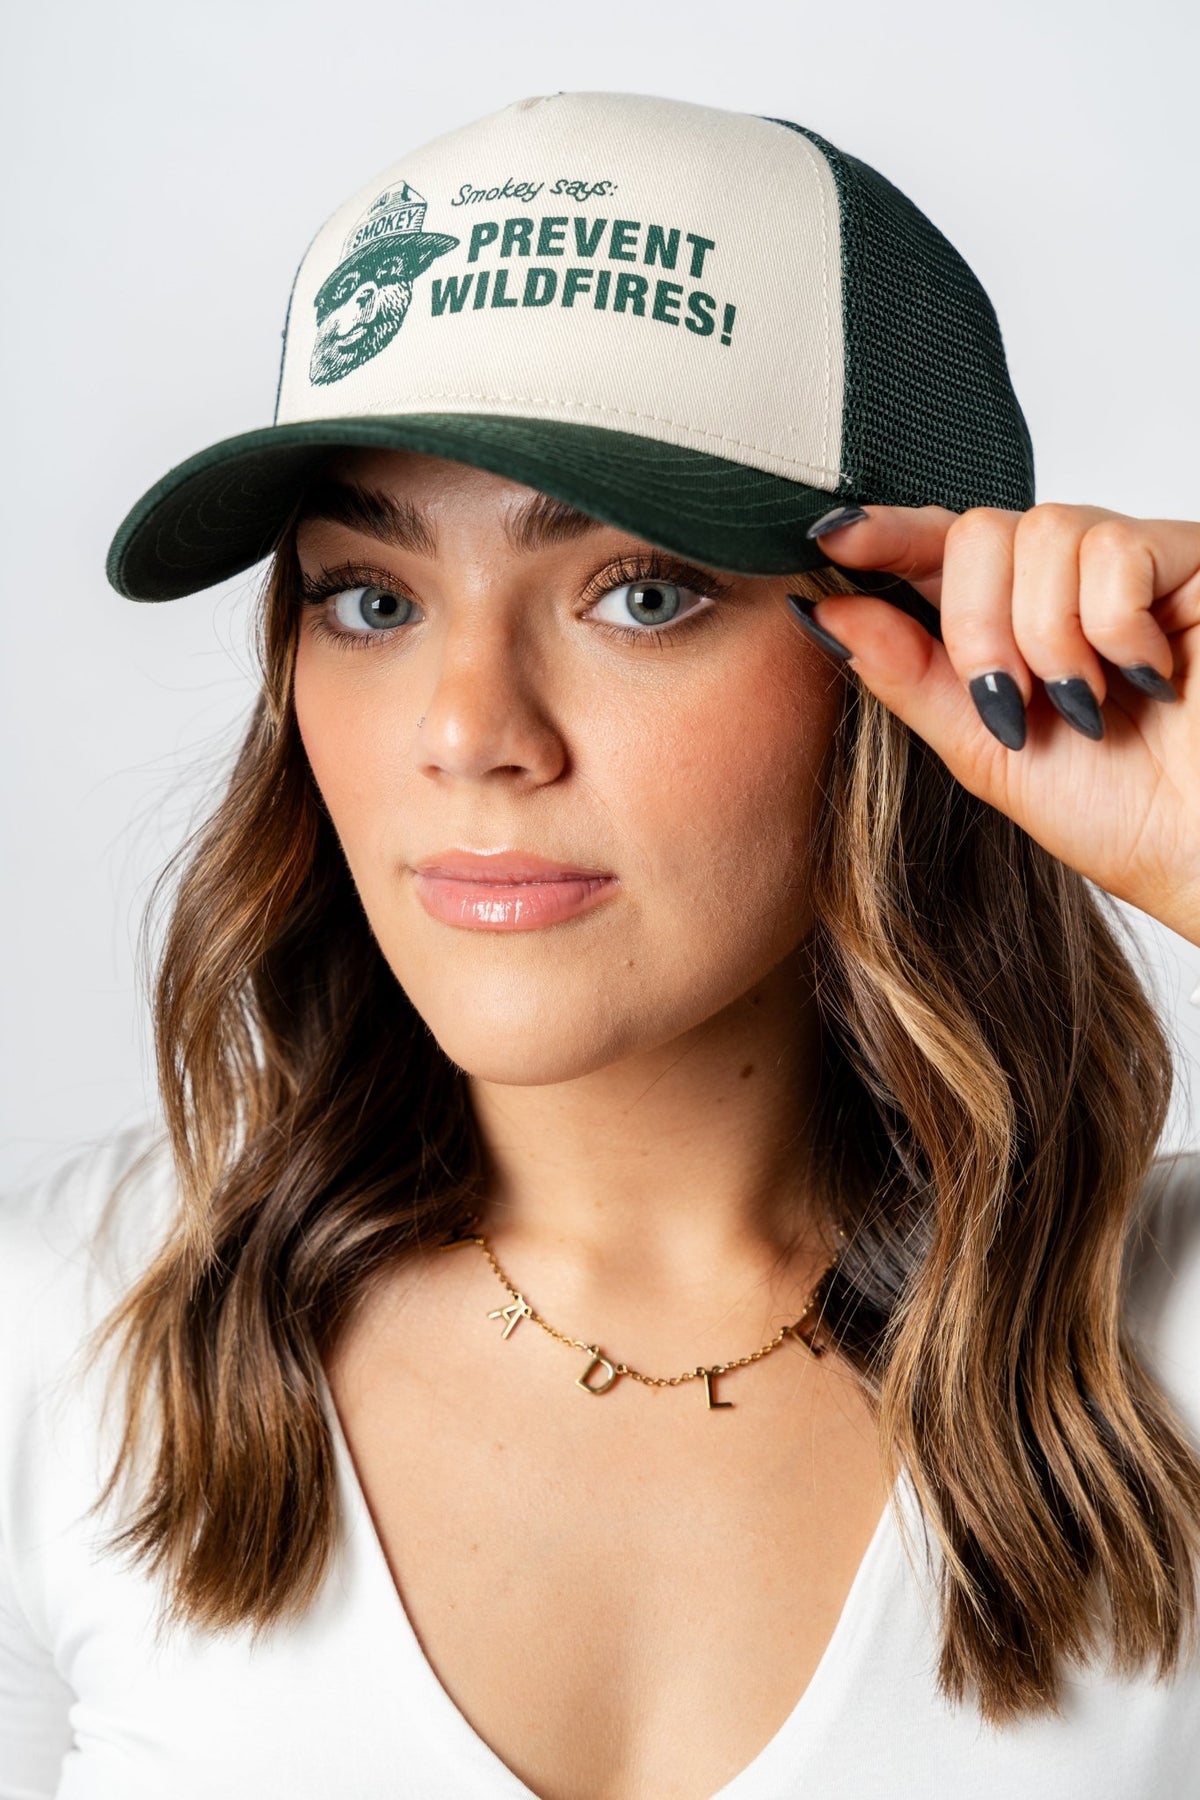 Smokey the bear sinclair trucker hat ivory/green - Trendy Gifts at Lush Fashion Lounge Boutique in Oklahoma City